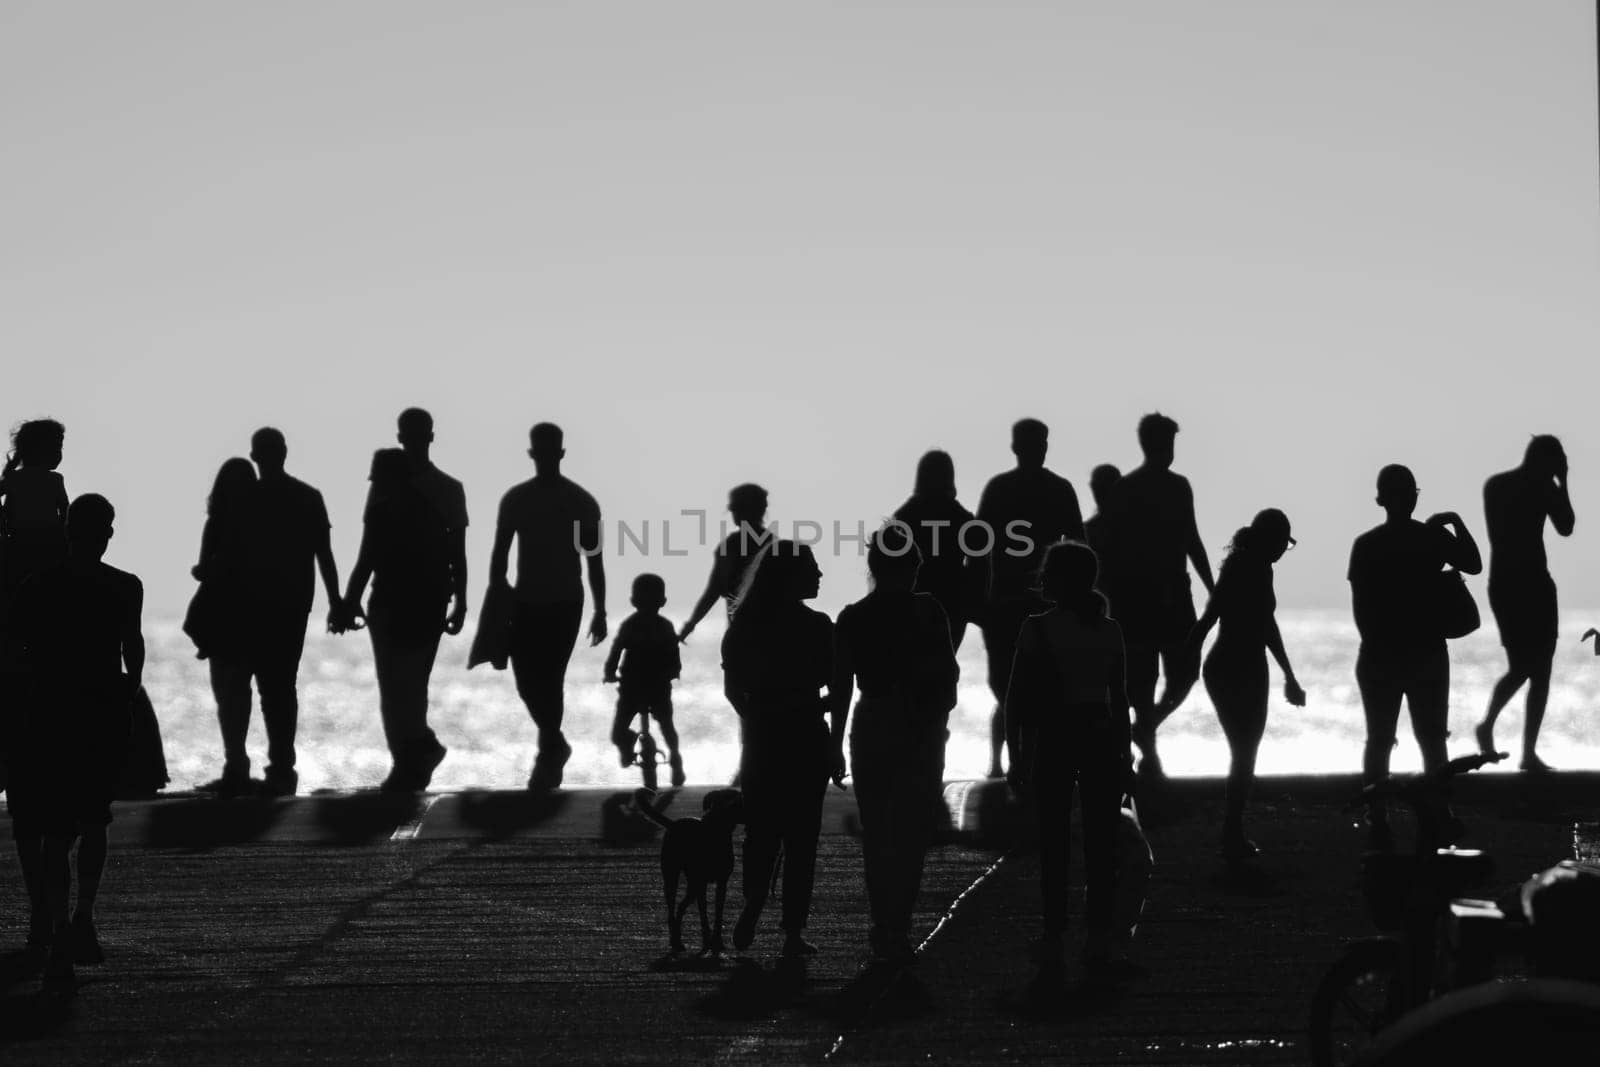 Monochrome image of silhouettes of people walking on the hill by the sea. Mid shot